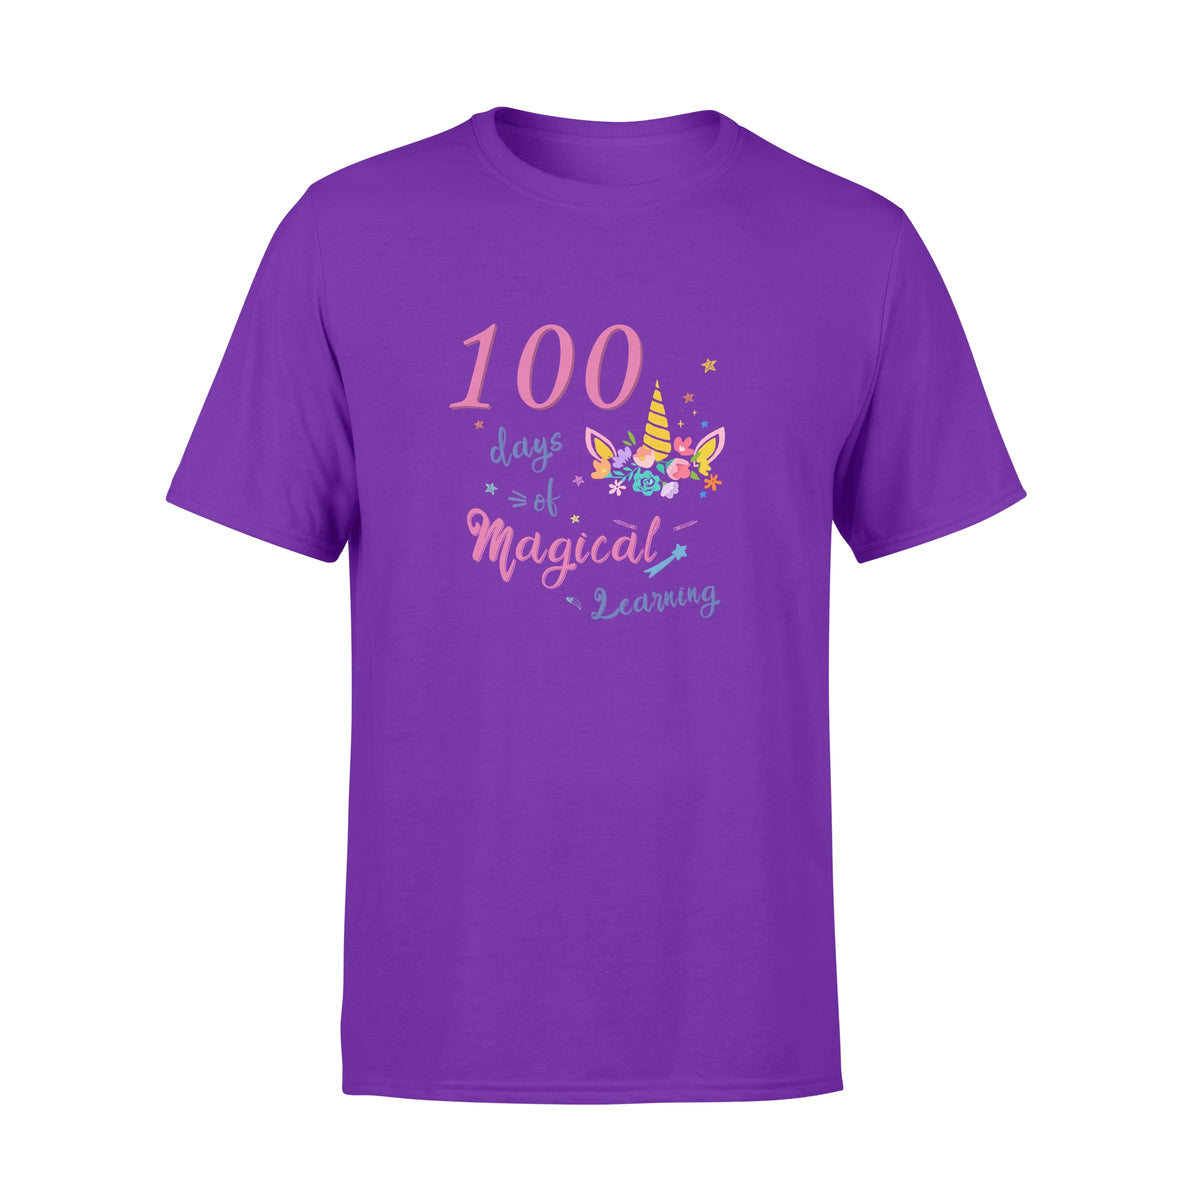 [Man Woman] Happy 100 days of school premium t-shirt ideas for kid kindergarten students - 100 days of magical learning